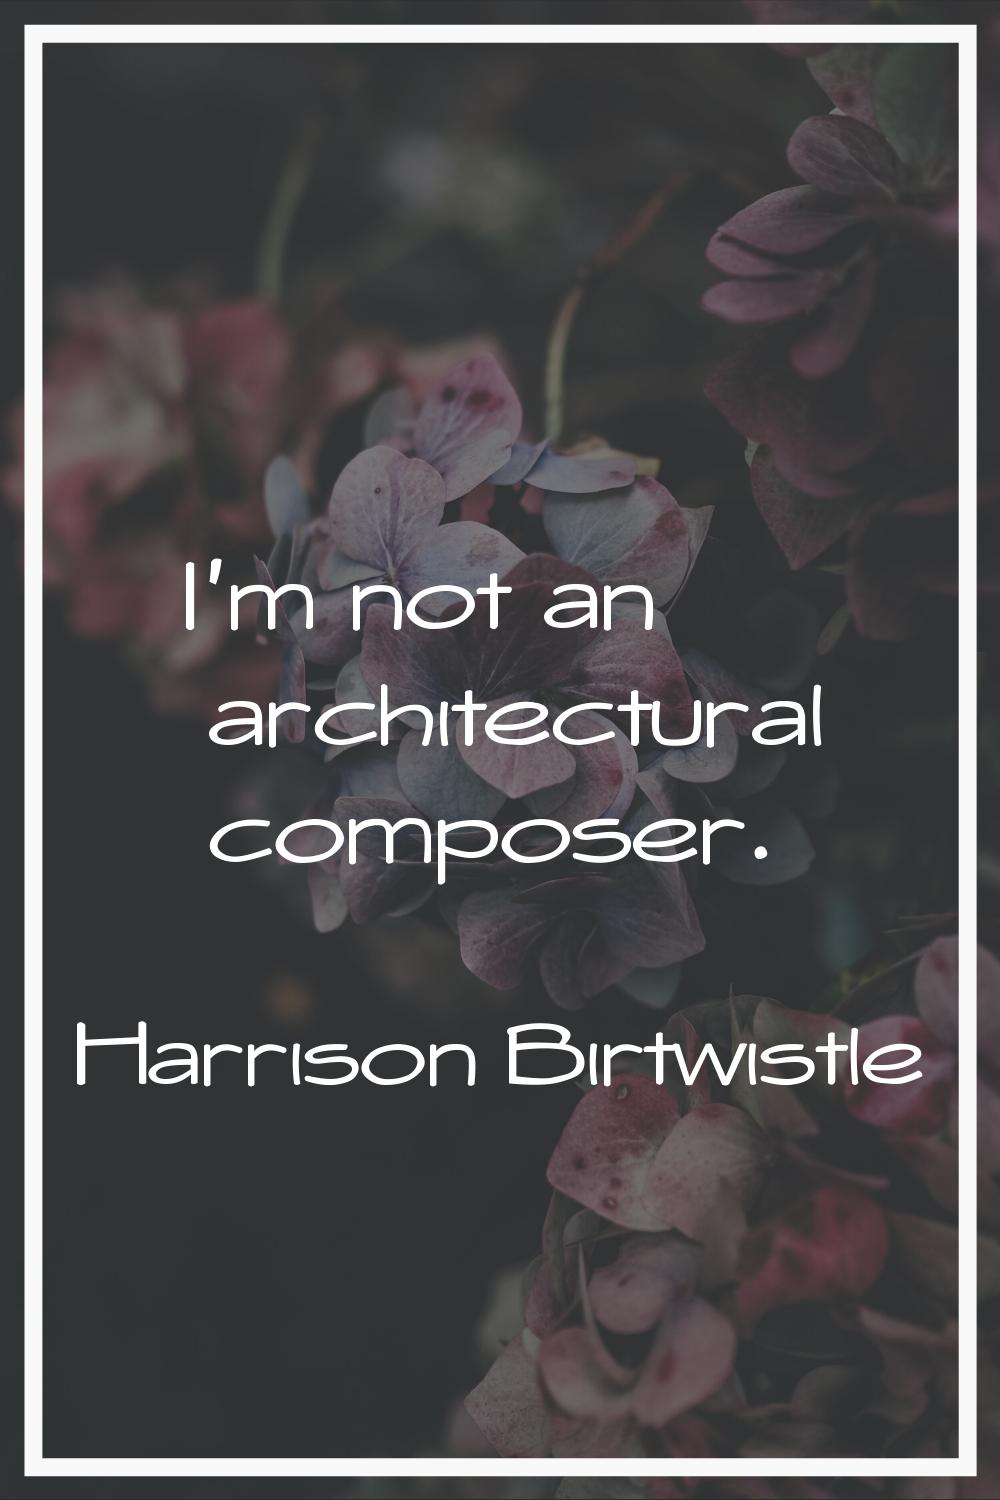 I'm not an architectural composer.